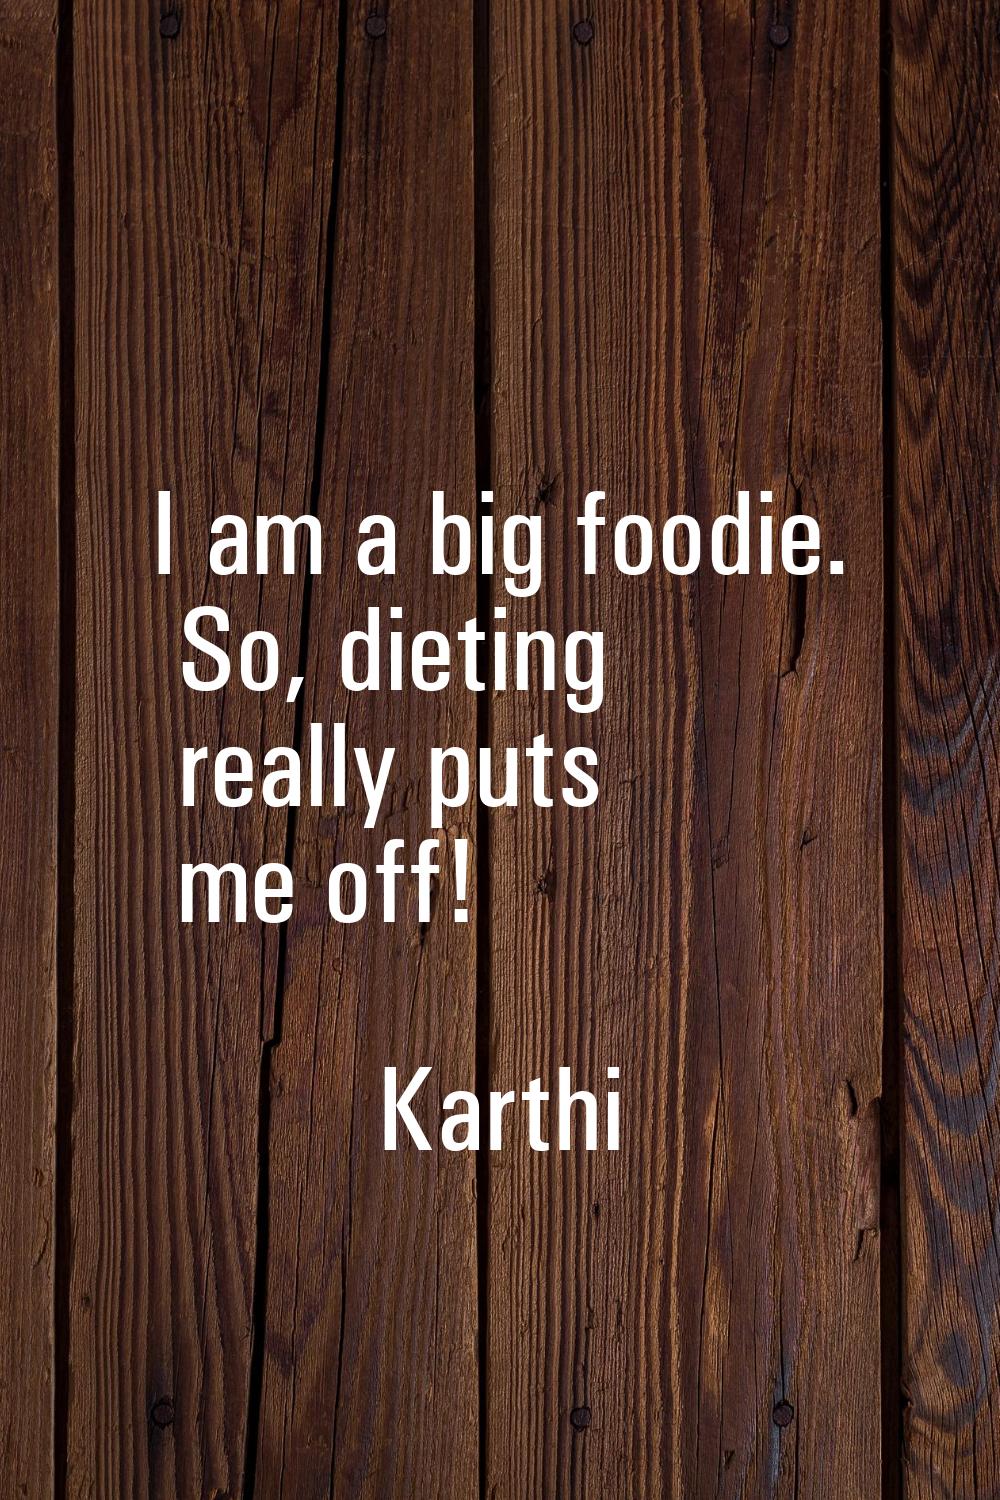 I am a big foodie. So, dieting really puts me off!